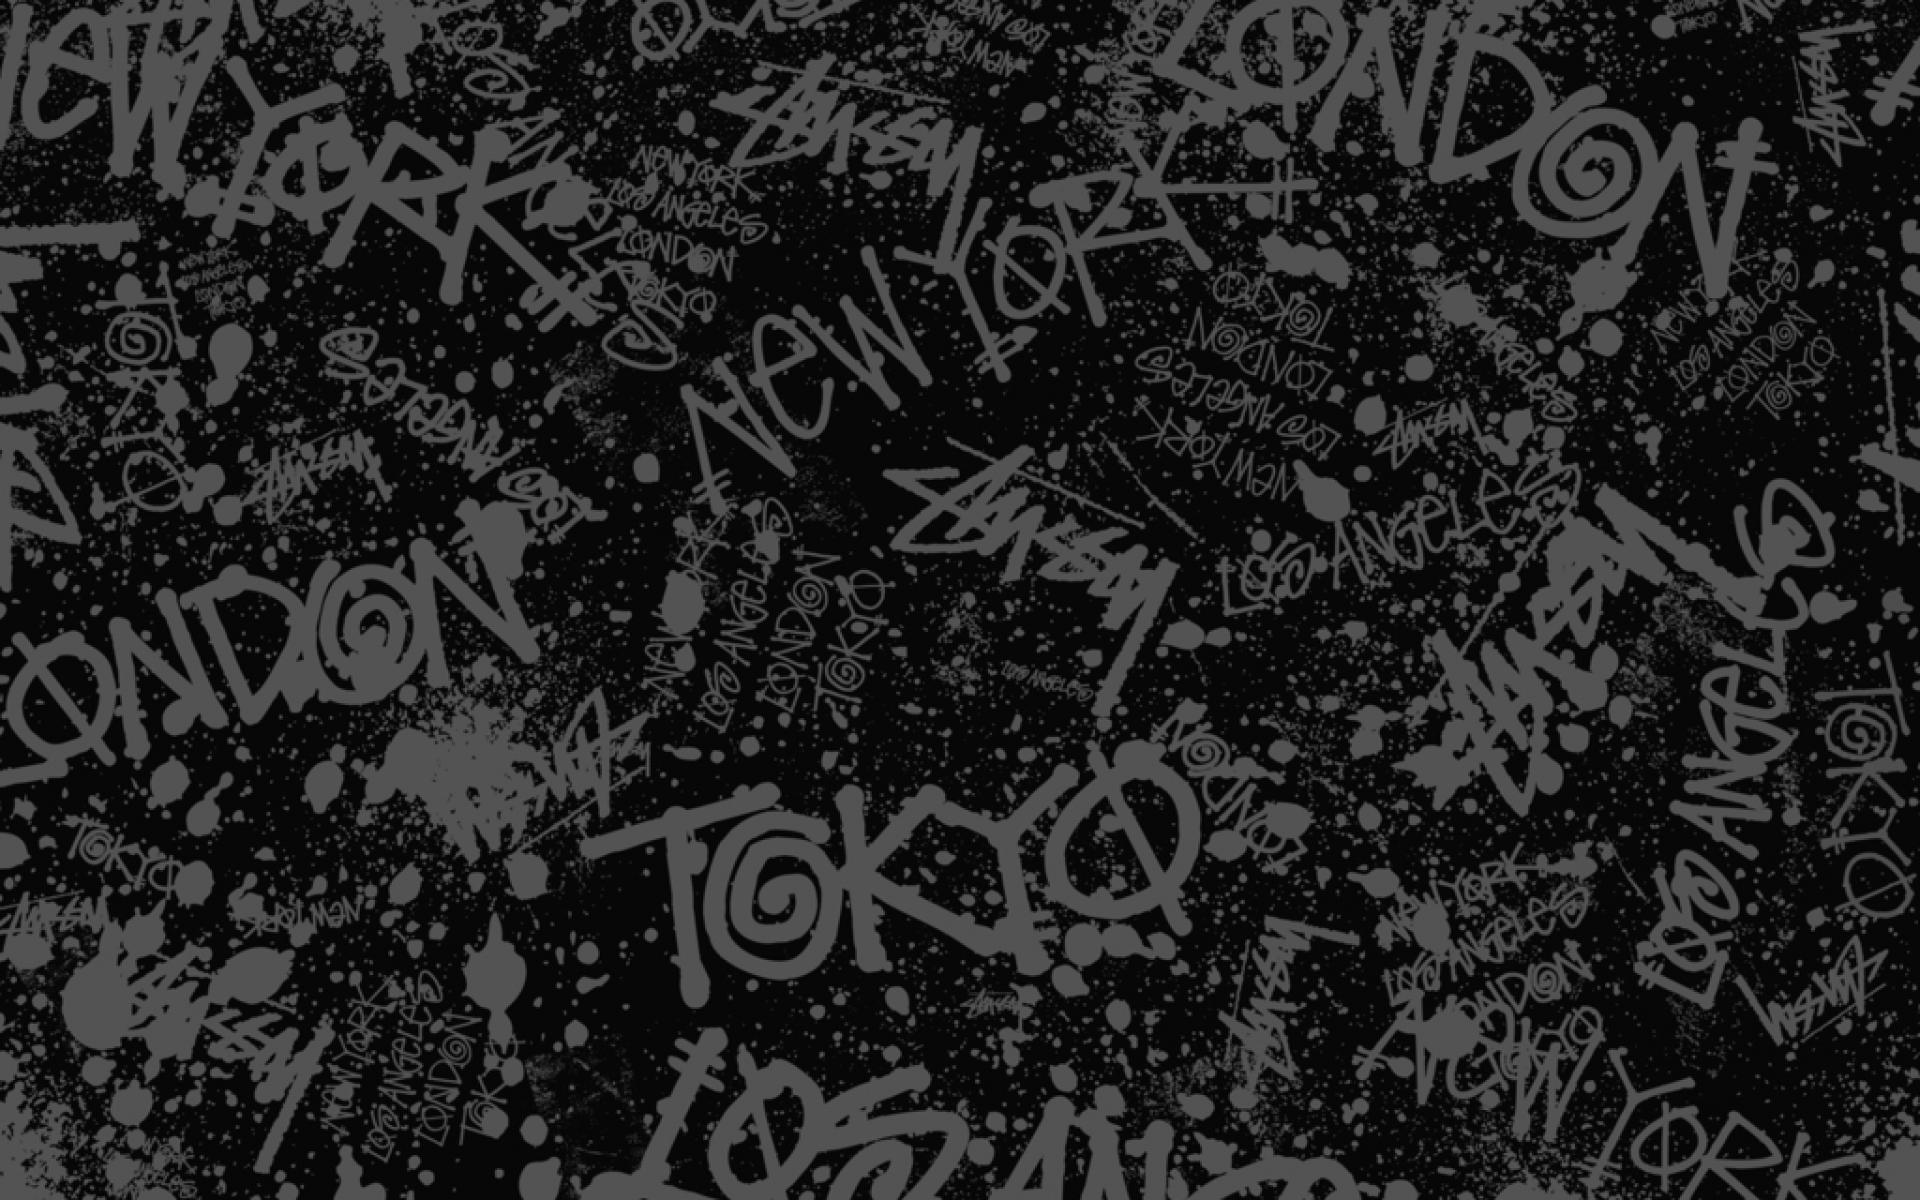 The black and white graffiti background is a great way to showcase your art - Grunge, emo, graffiti